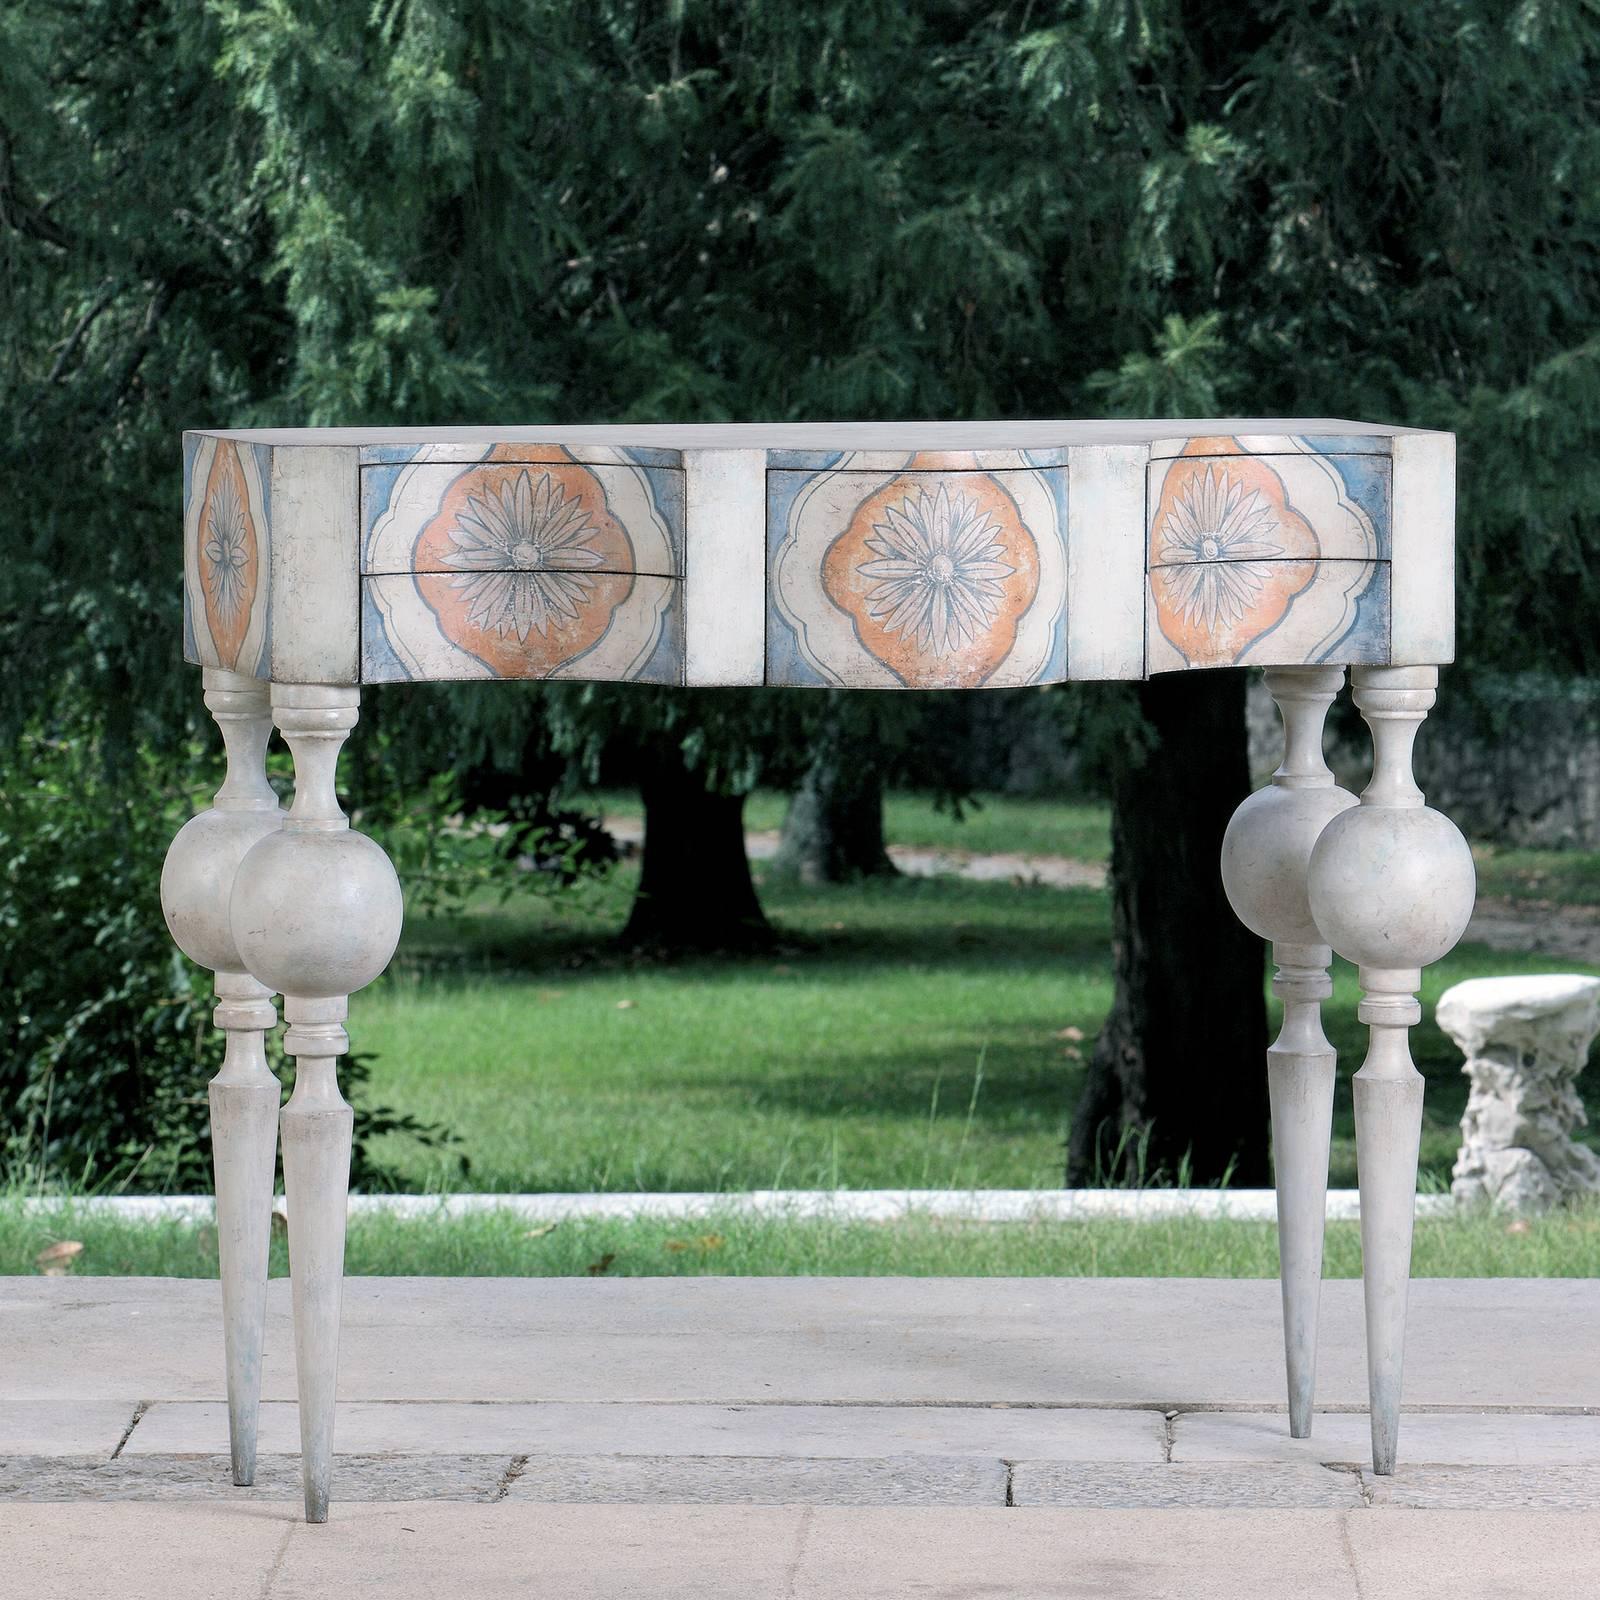 This stunning console channels ancient Venetian design forms with creamy vanilla legs embellished with a large globe that accentuate its elegant frame. Hand painted in a delicate sky blue with antiqued finish, the solid wood structure features front